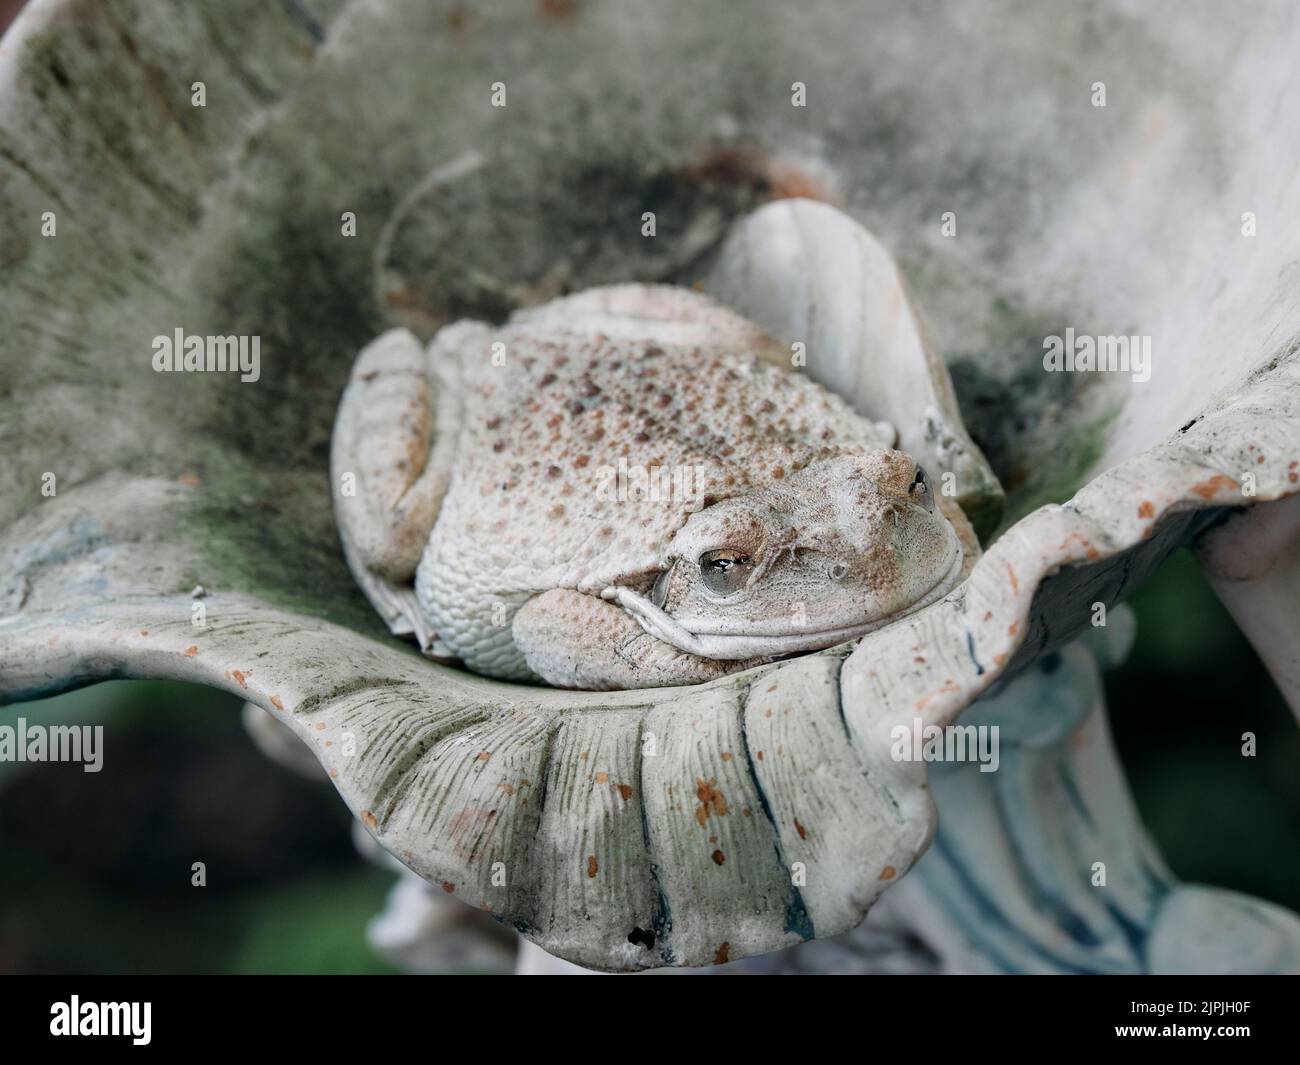 Grey anaxyrus fowleri or Fowler's toad found resting in a small garden fountain feature in central Alabama, USA. Stock Photo